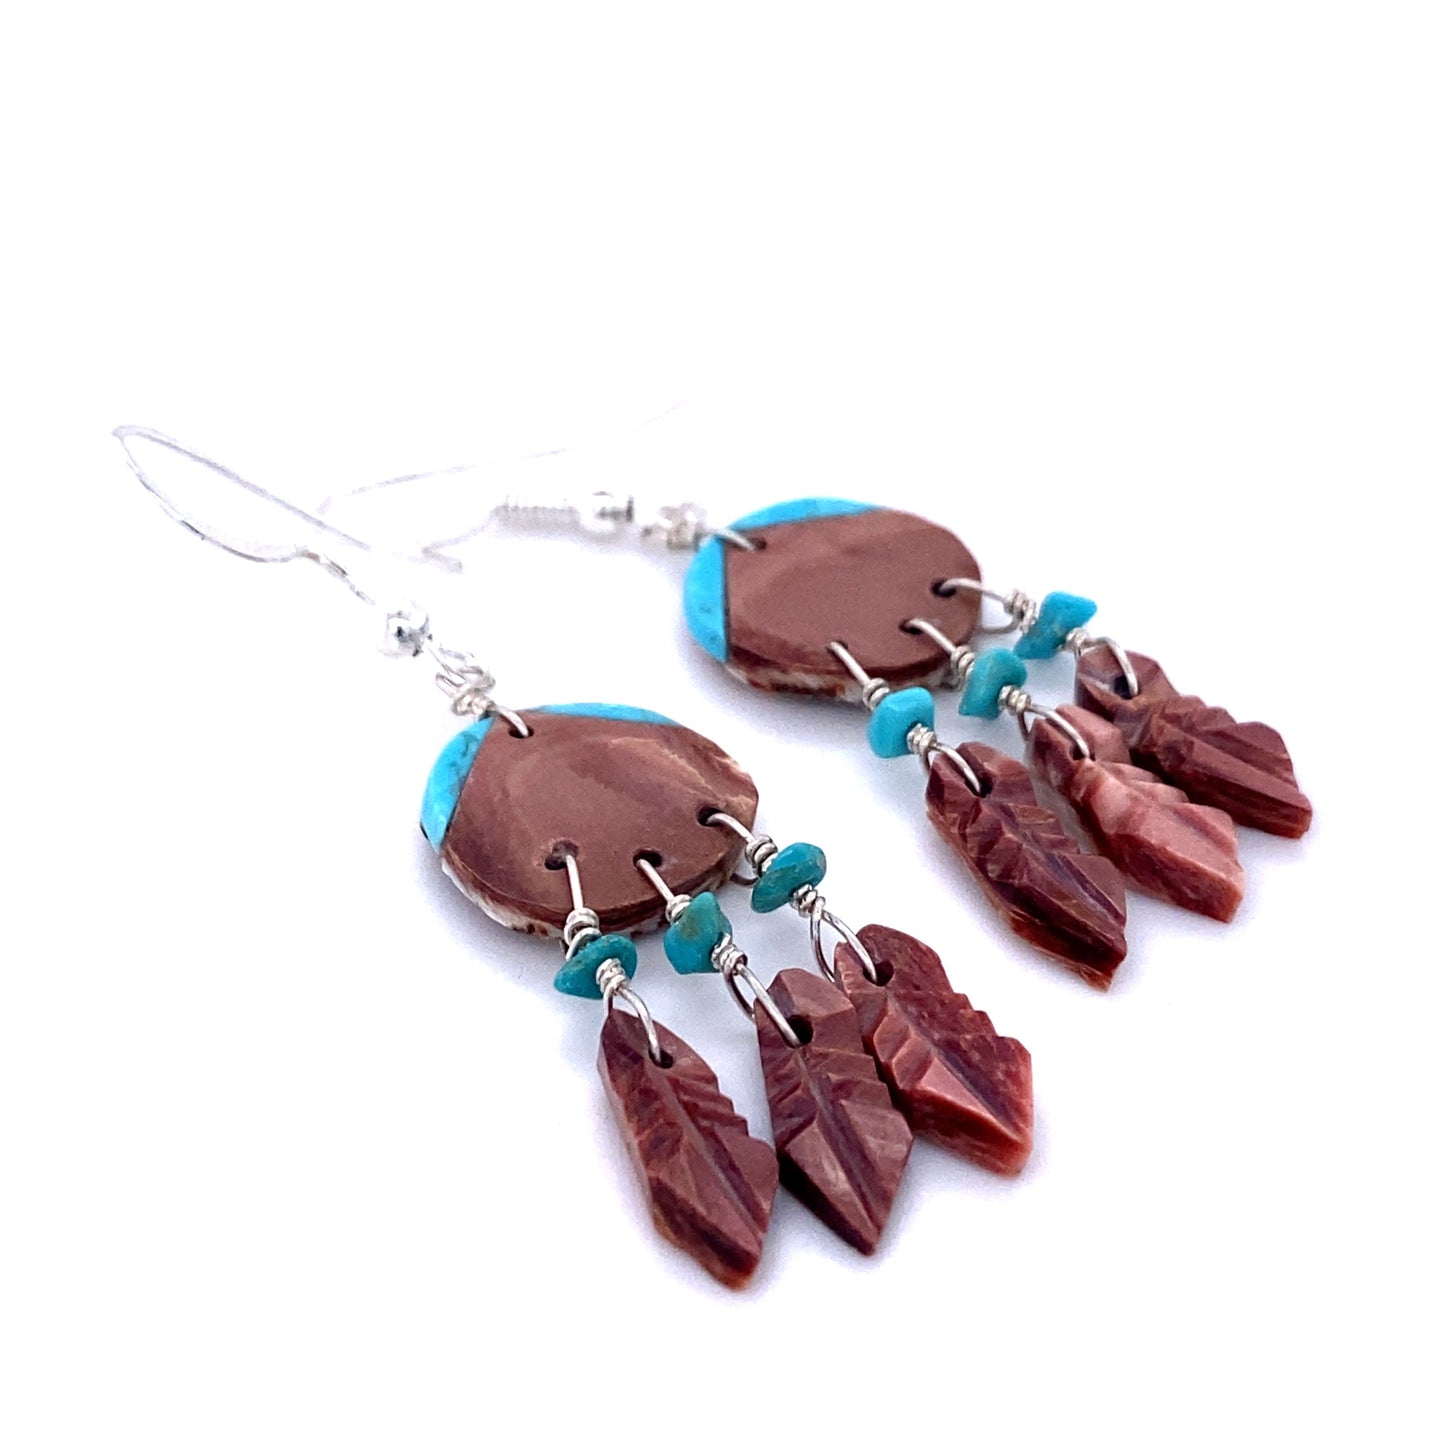 
                  
                    Super Silver's Handmade Earrings with 3 Small Stone Feathers, featuring brown and turquoise natural stone beads, inspired by Native American culture.
                  
                